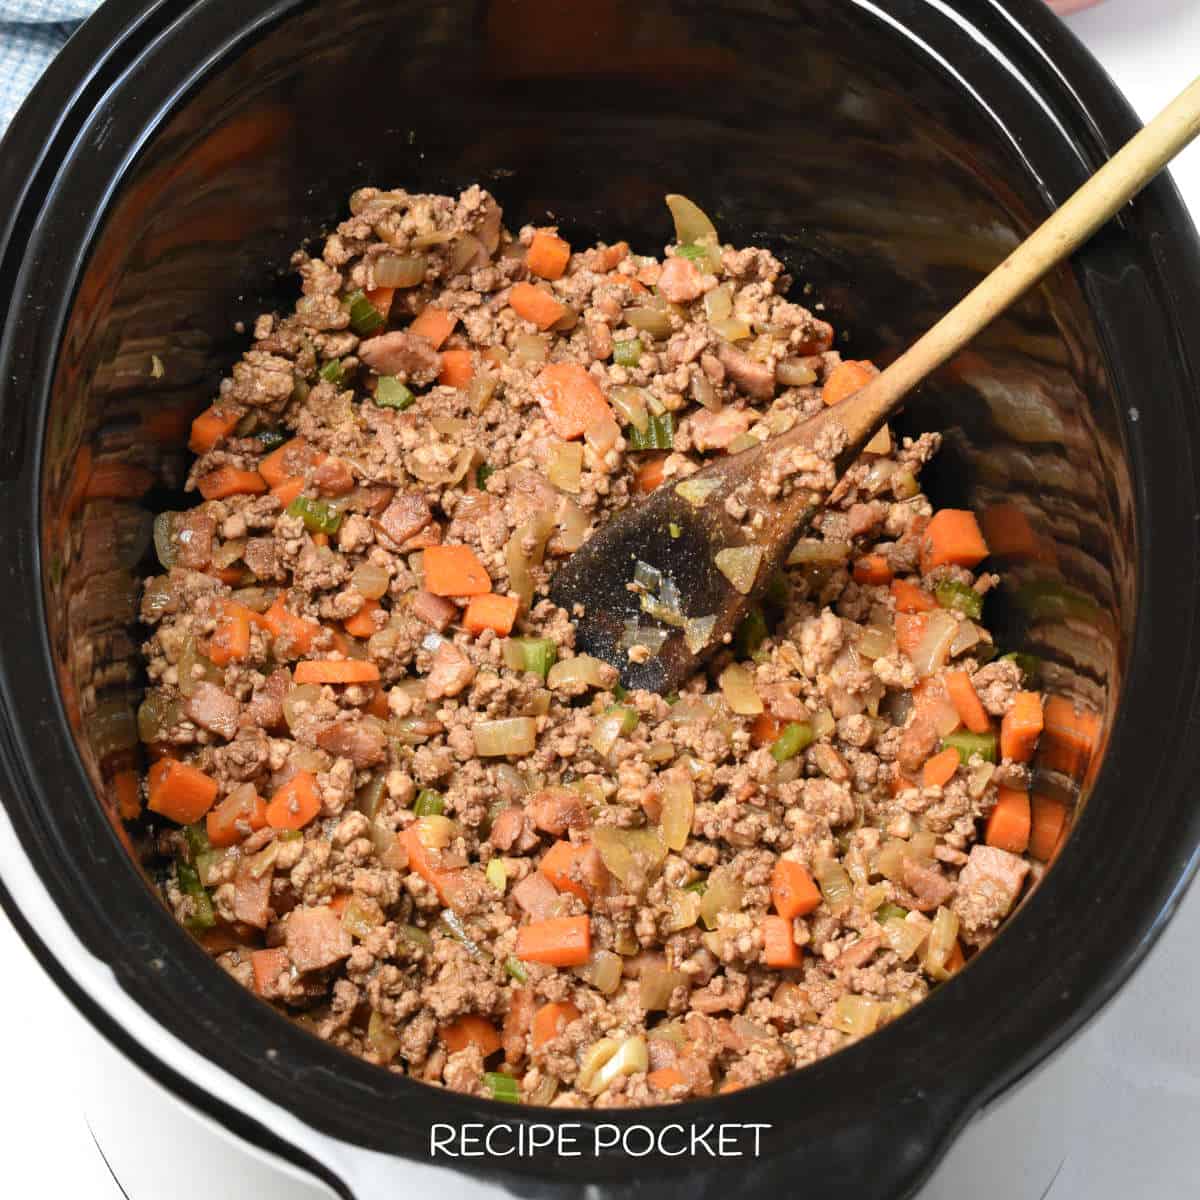 Meat and vegetables in a slow cooker bowl.